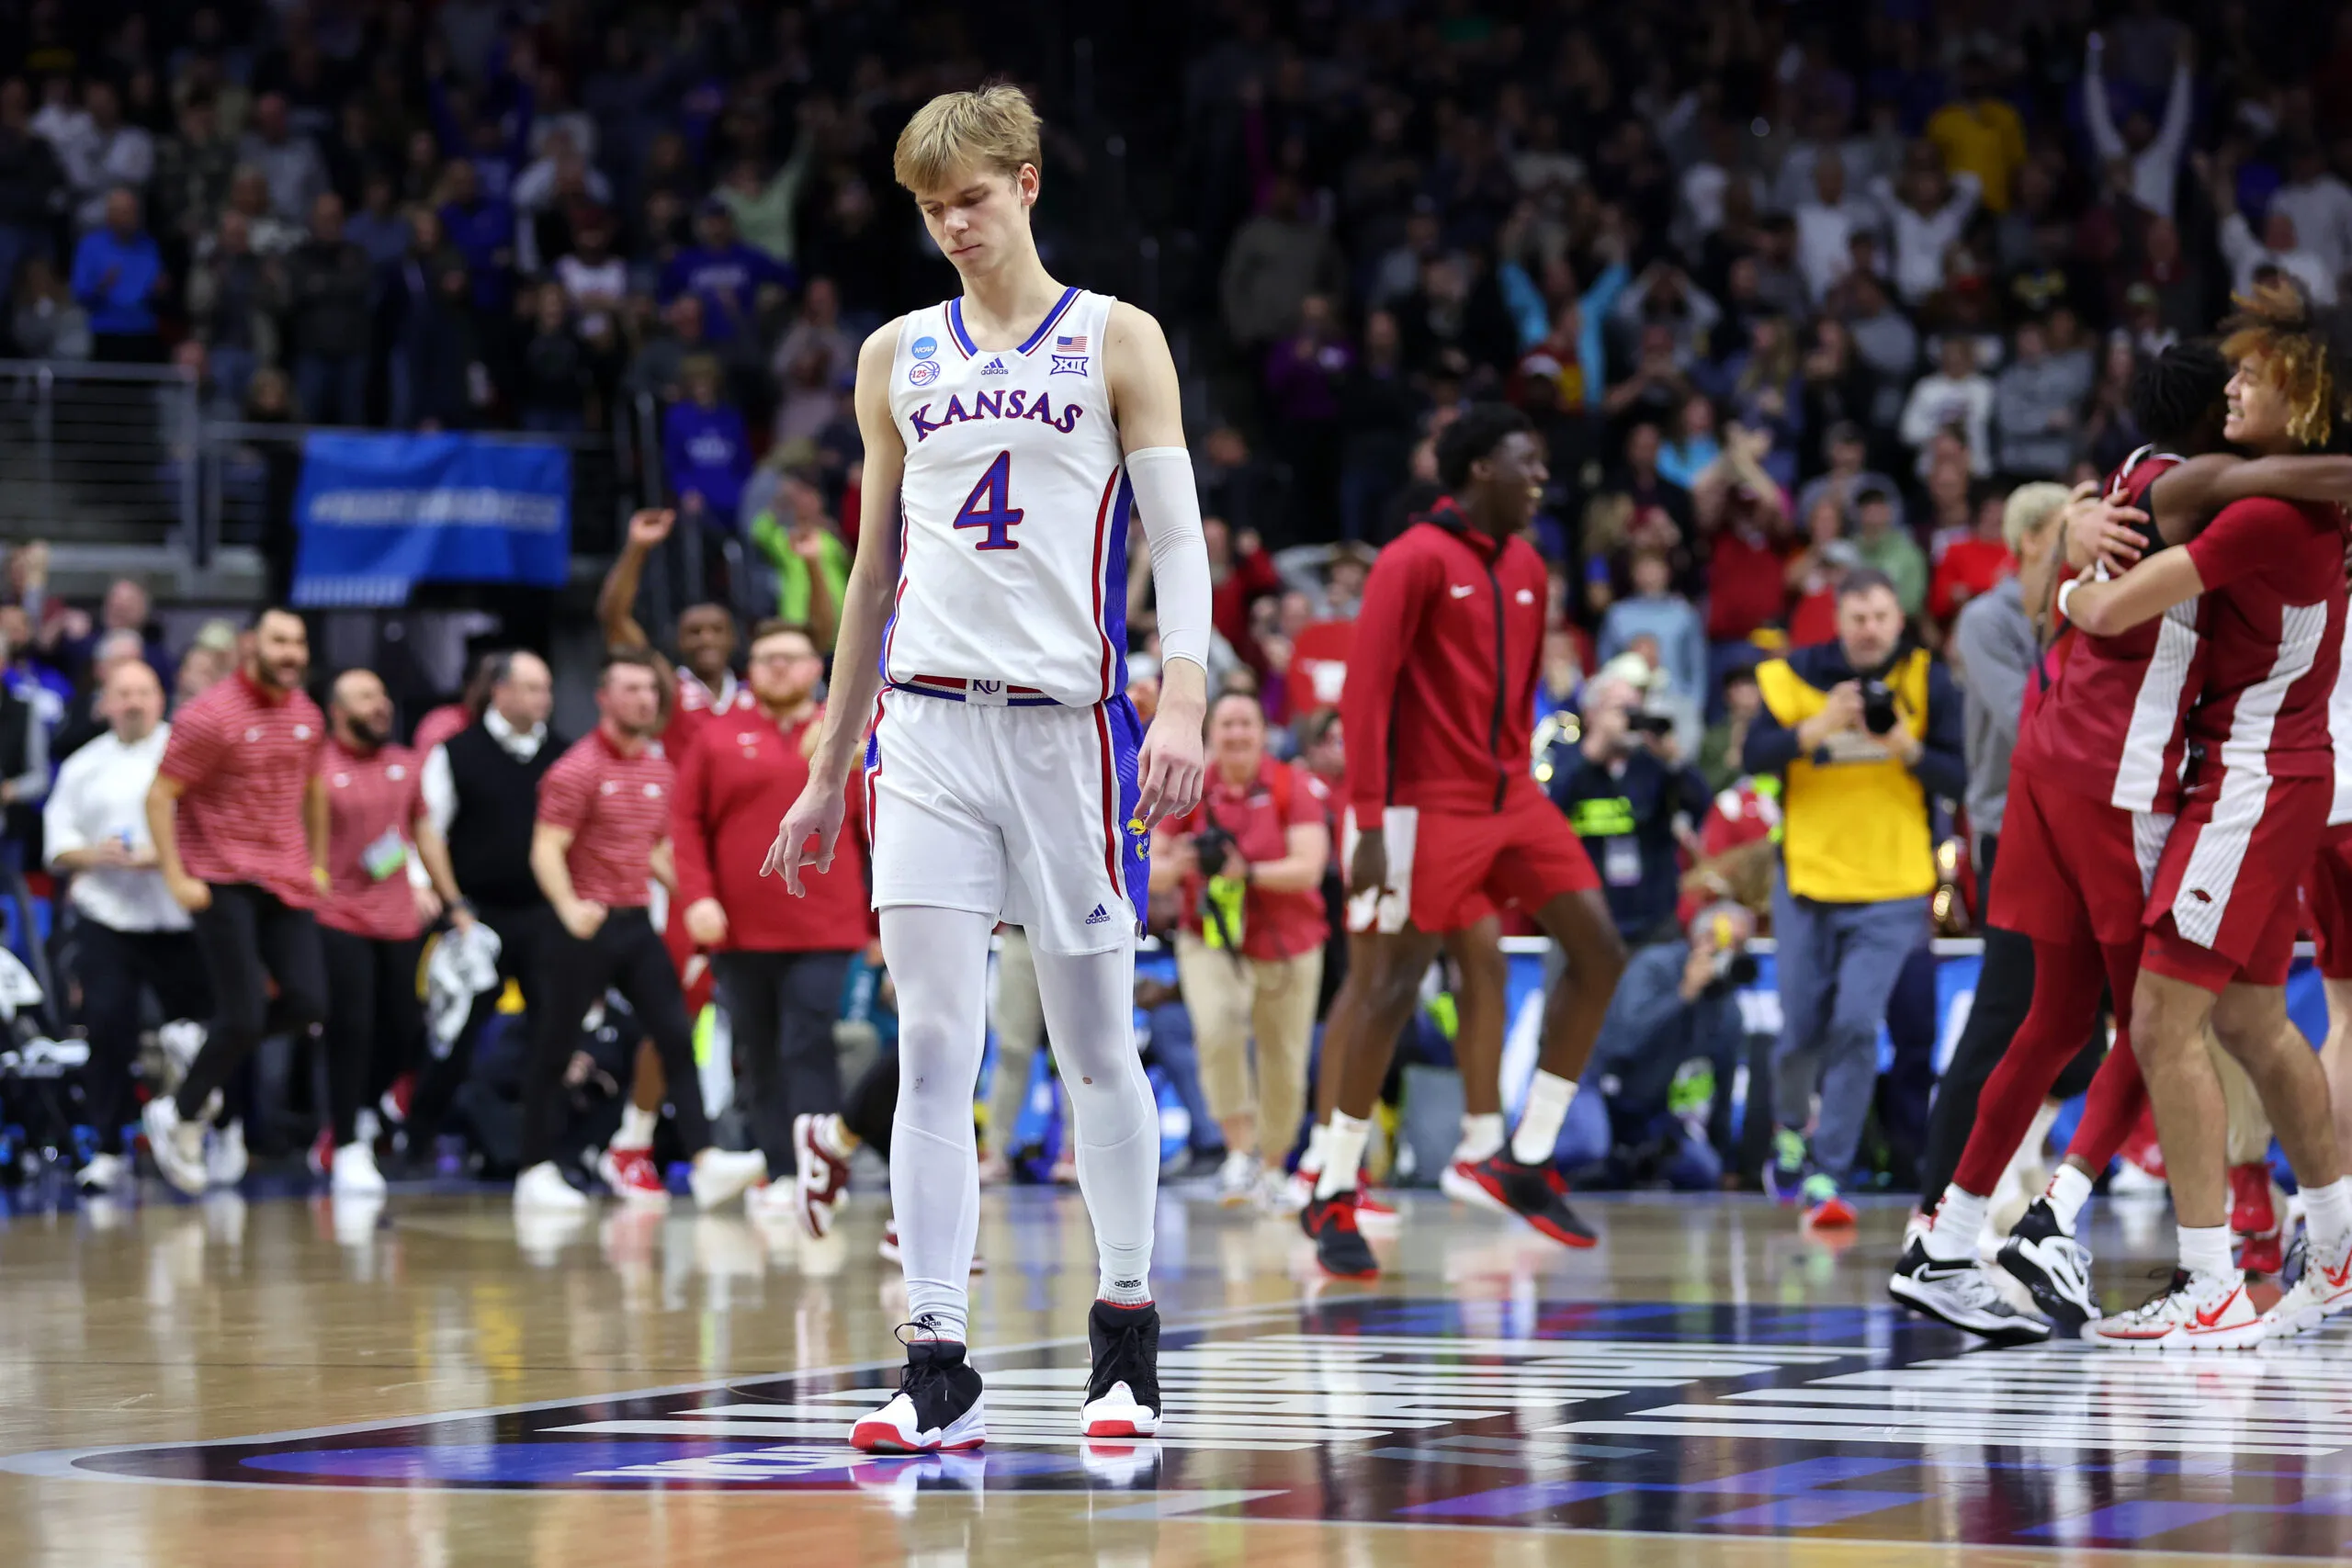 DES MOINES, IOWA - MARCH 18: Gradey Dick #4 of the Kansas Jayhawks reacts after being defeated by the Arkansas Razorbacks in the second round of the NCAA Men's Basketball Tournament at Wells Fargo Arena on March 18, 2023 in Des Moines, Iowa. (Photo by Michael Reaves/Getty Images)